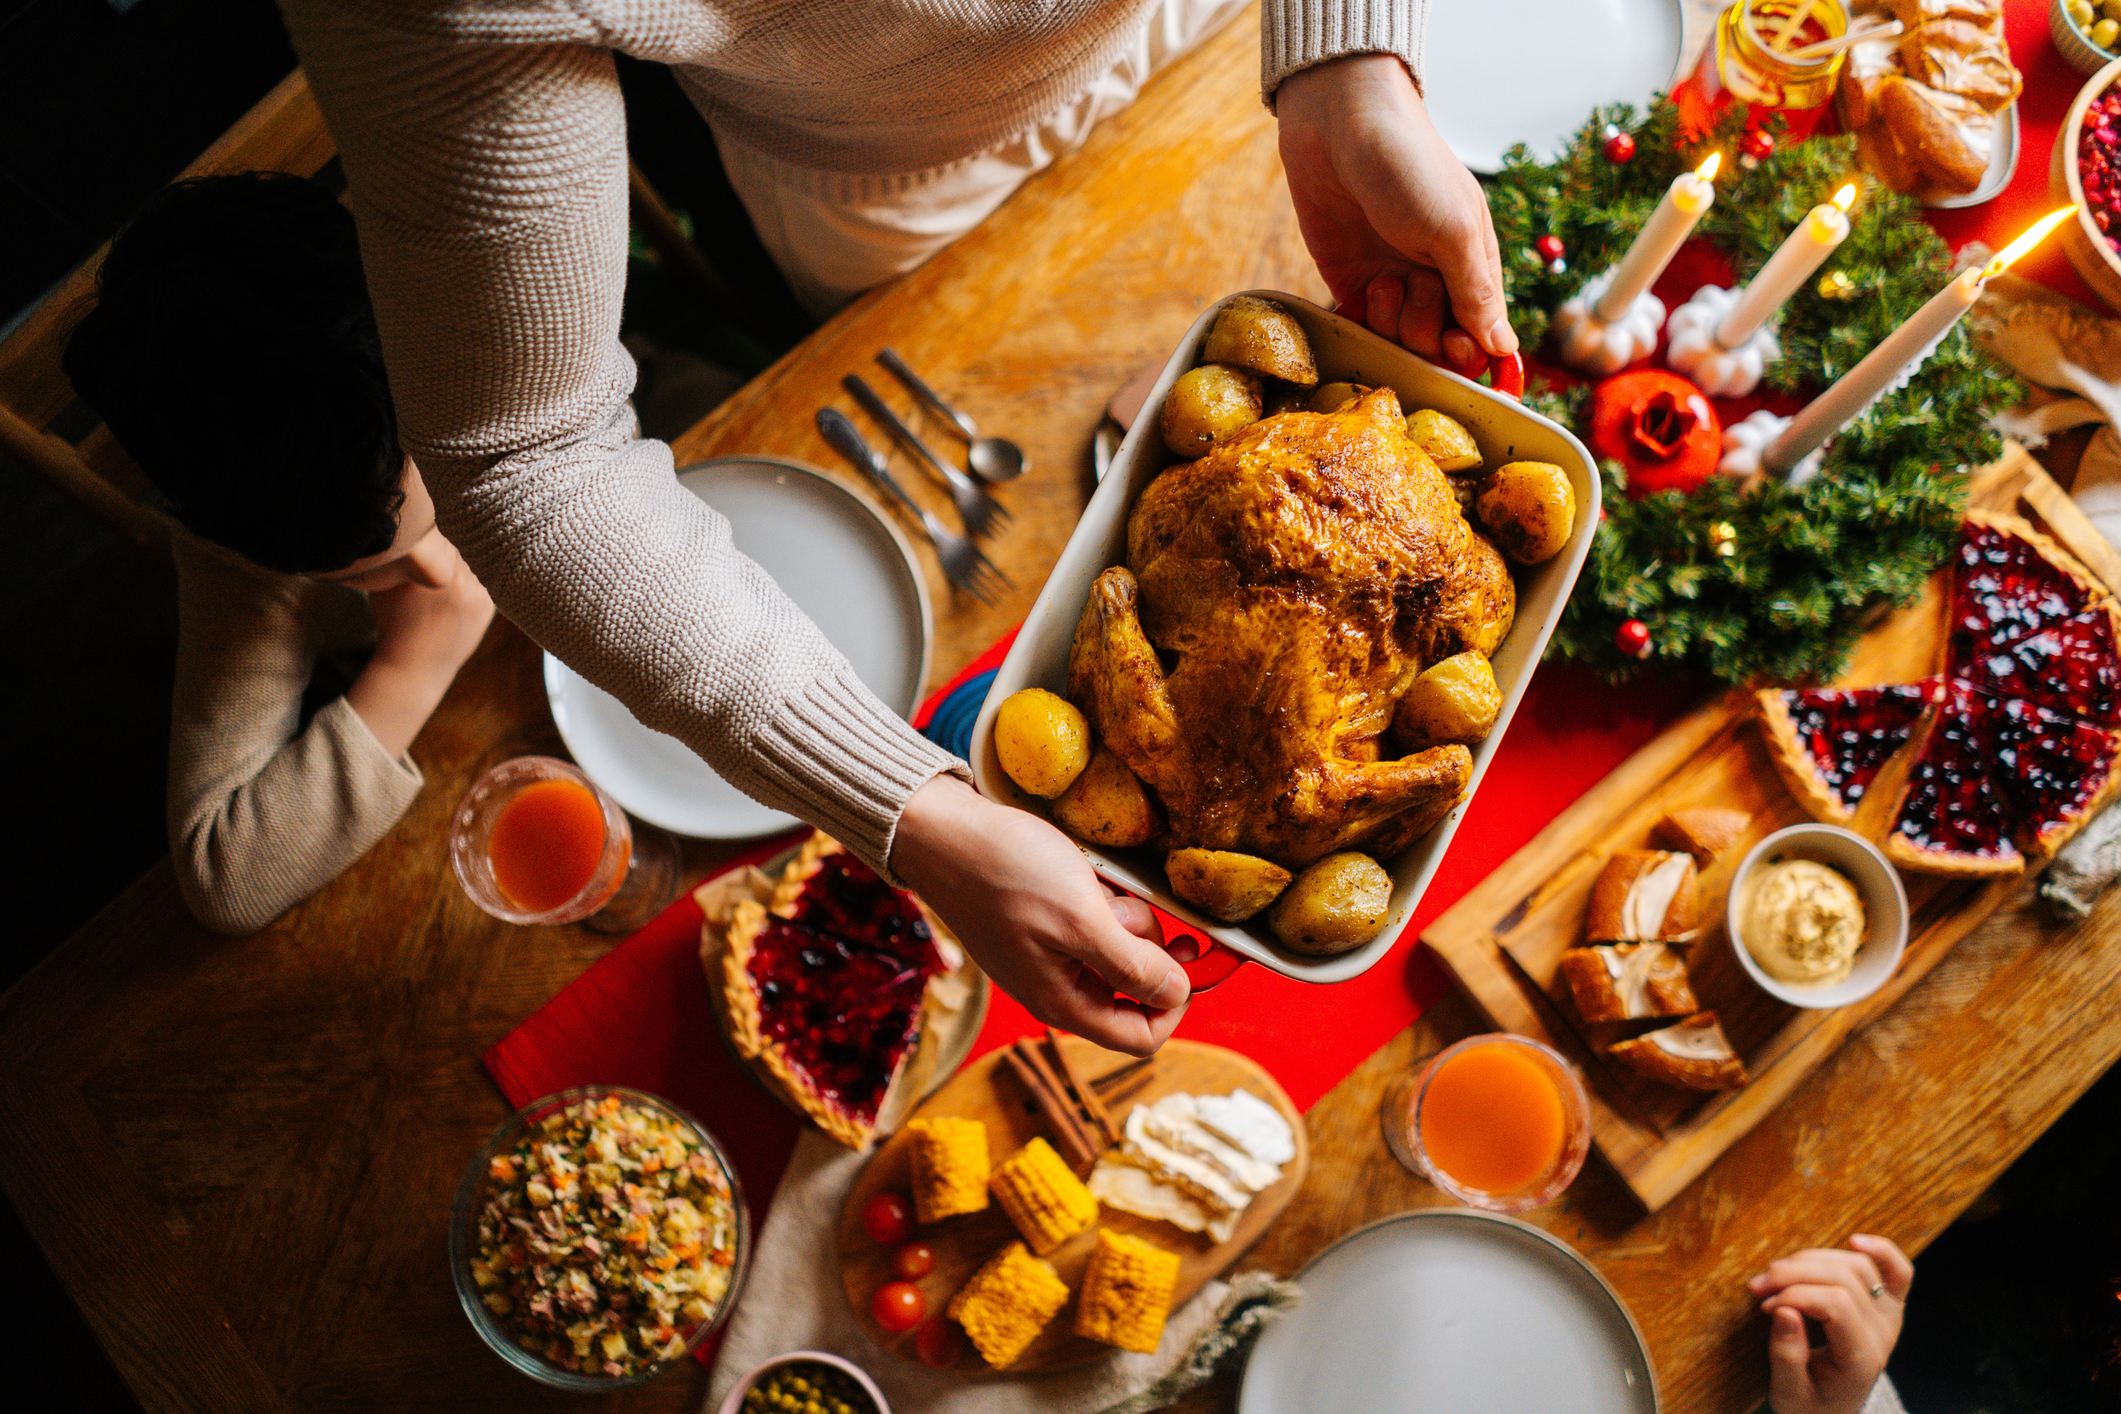 Expert warns 'sniff test' is unreliable for Christmas leftovers